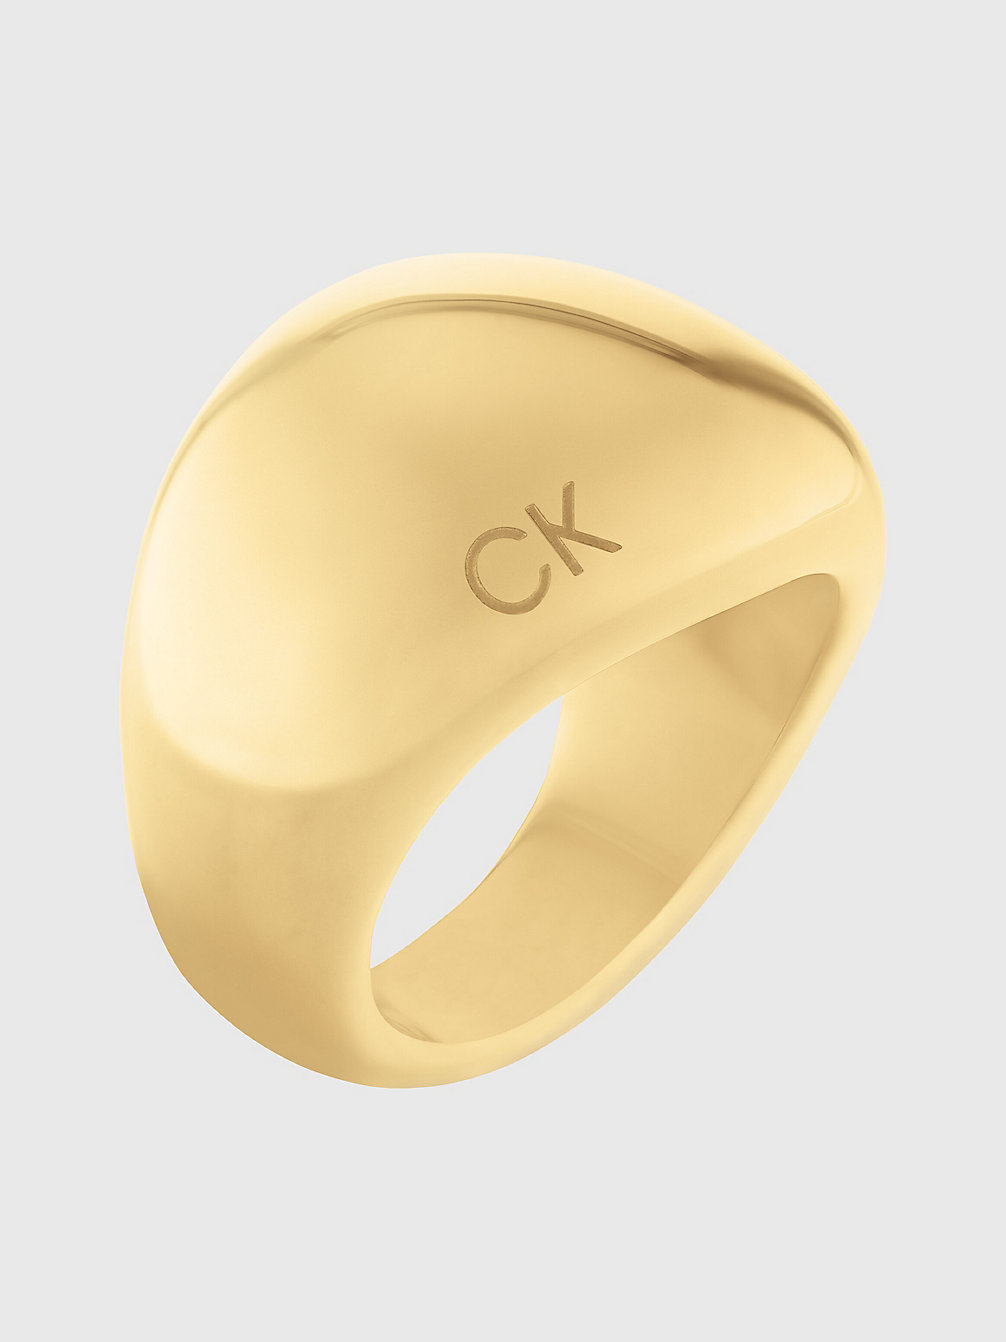 GOLD Ring - Playful Organic Shapes undefined dames Calvin Klein